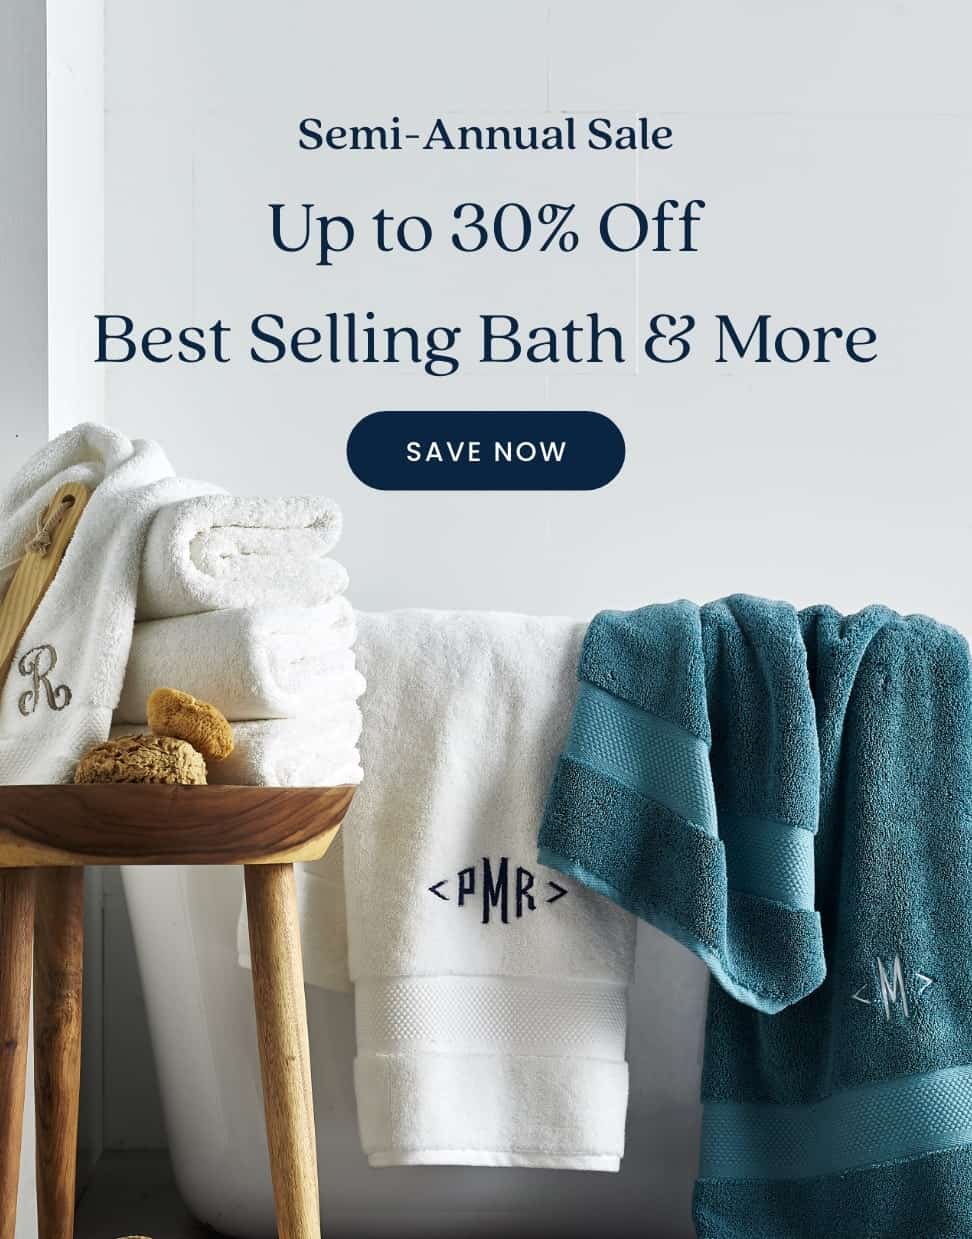 Up to 30% Off Best Selling Bath